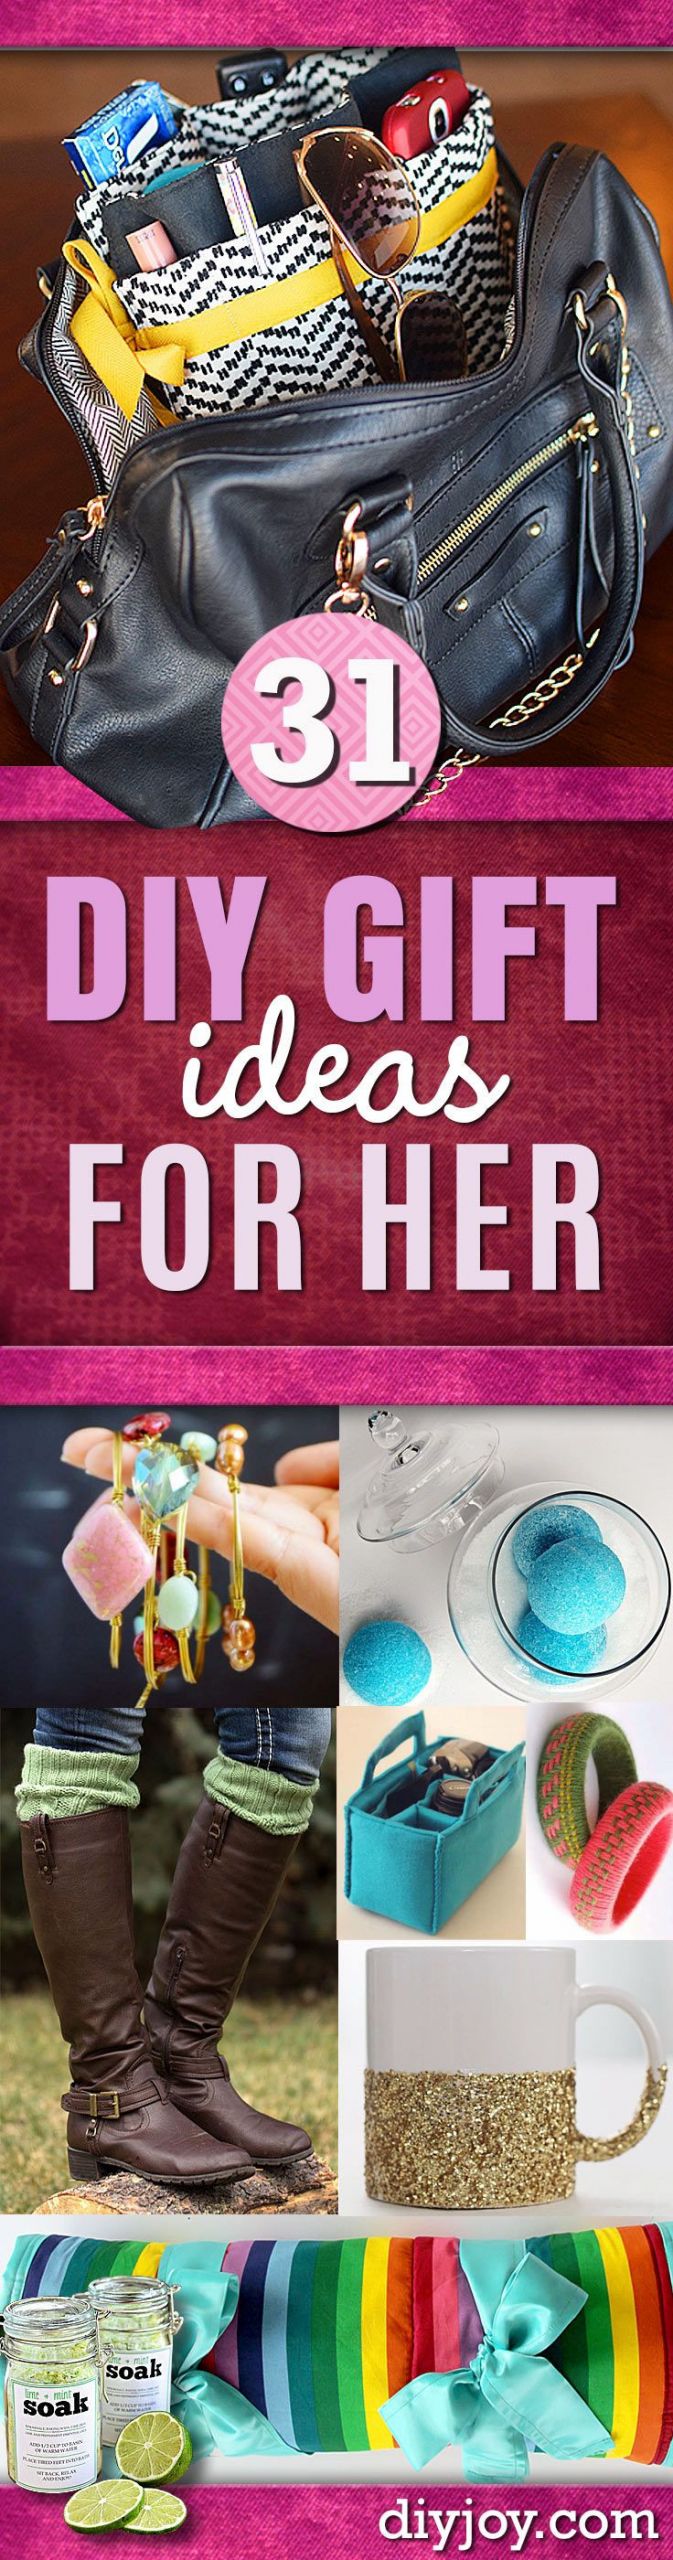 Cool Gift Ideas For Girlfriends
 Super Special DIY Gift Ideas for Her DIY JOY